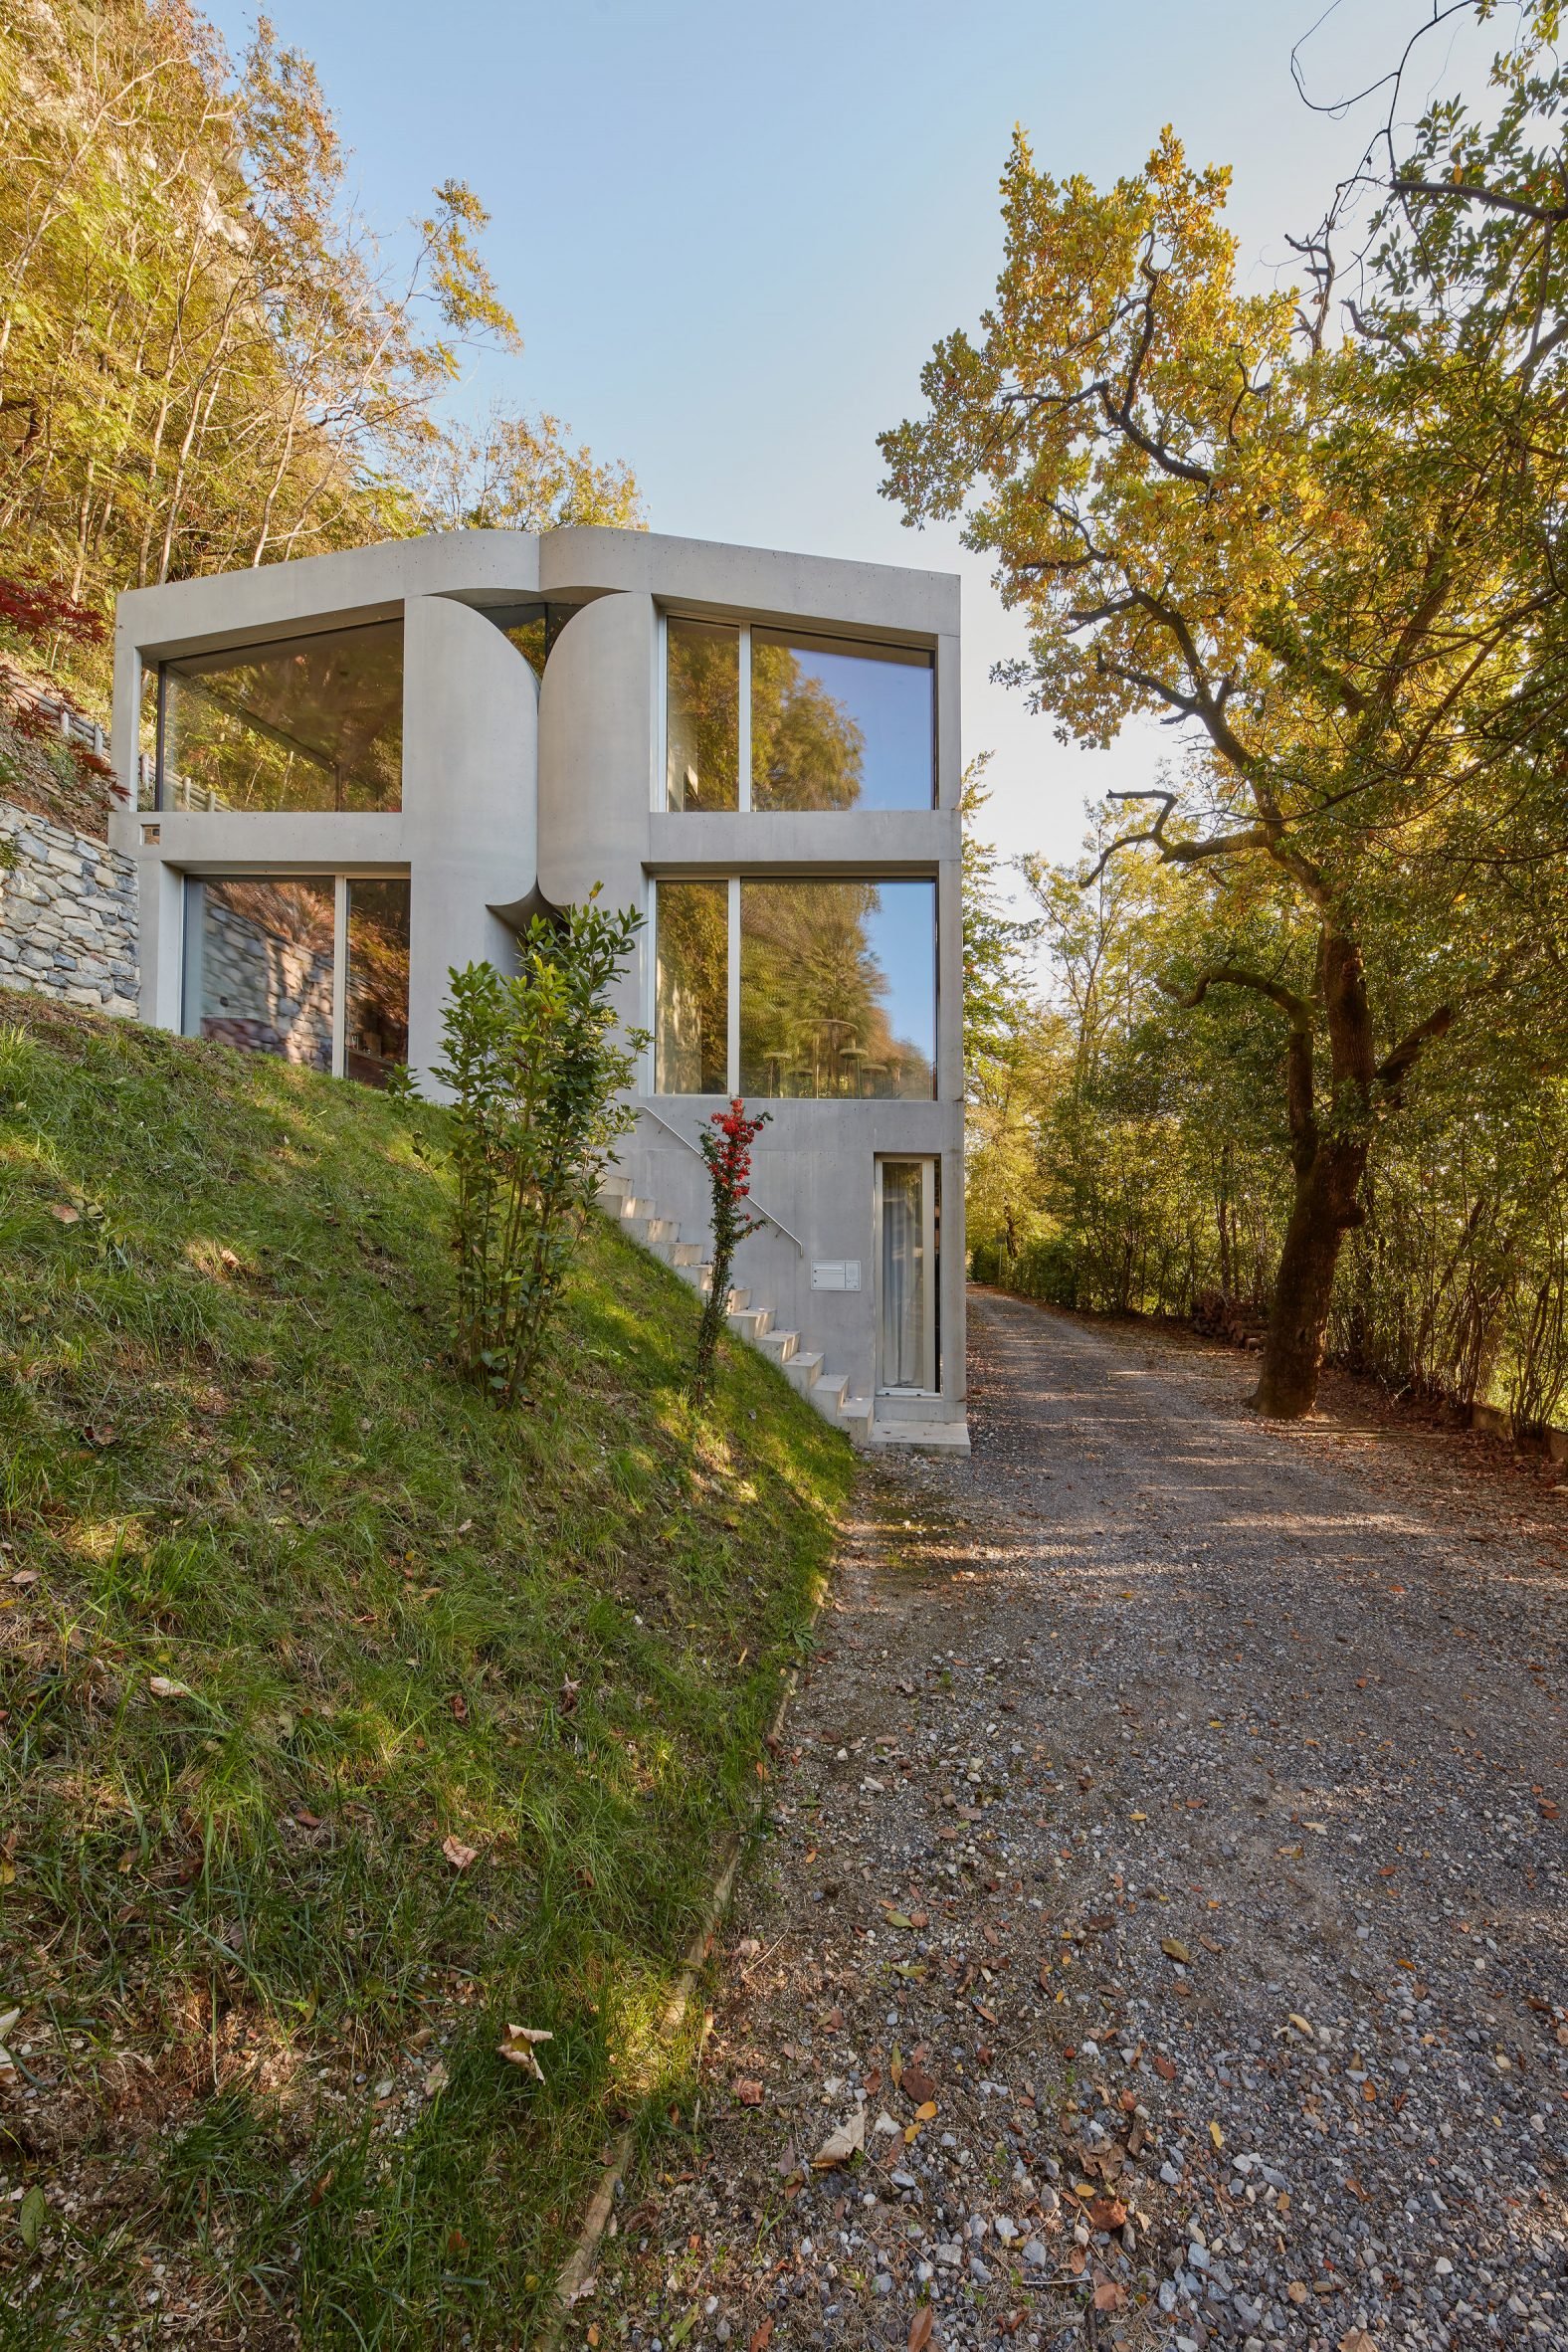 Concrete House C in Mendrisio by Celoria Architects